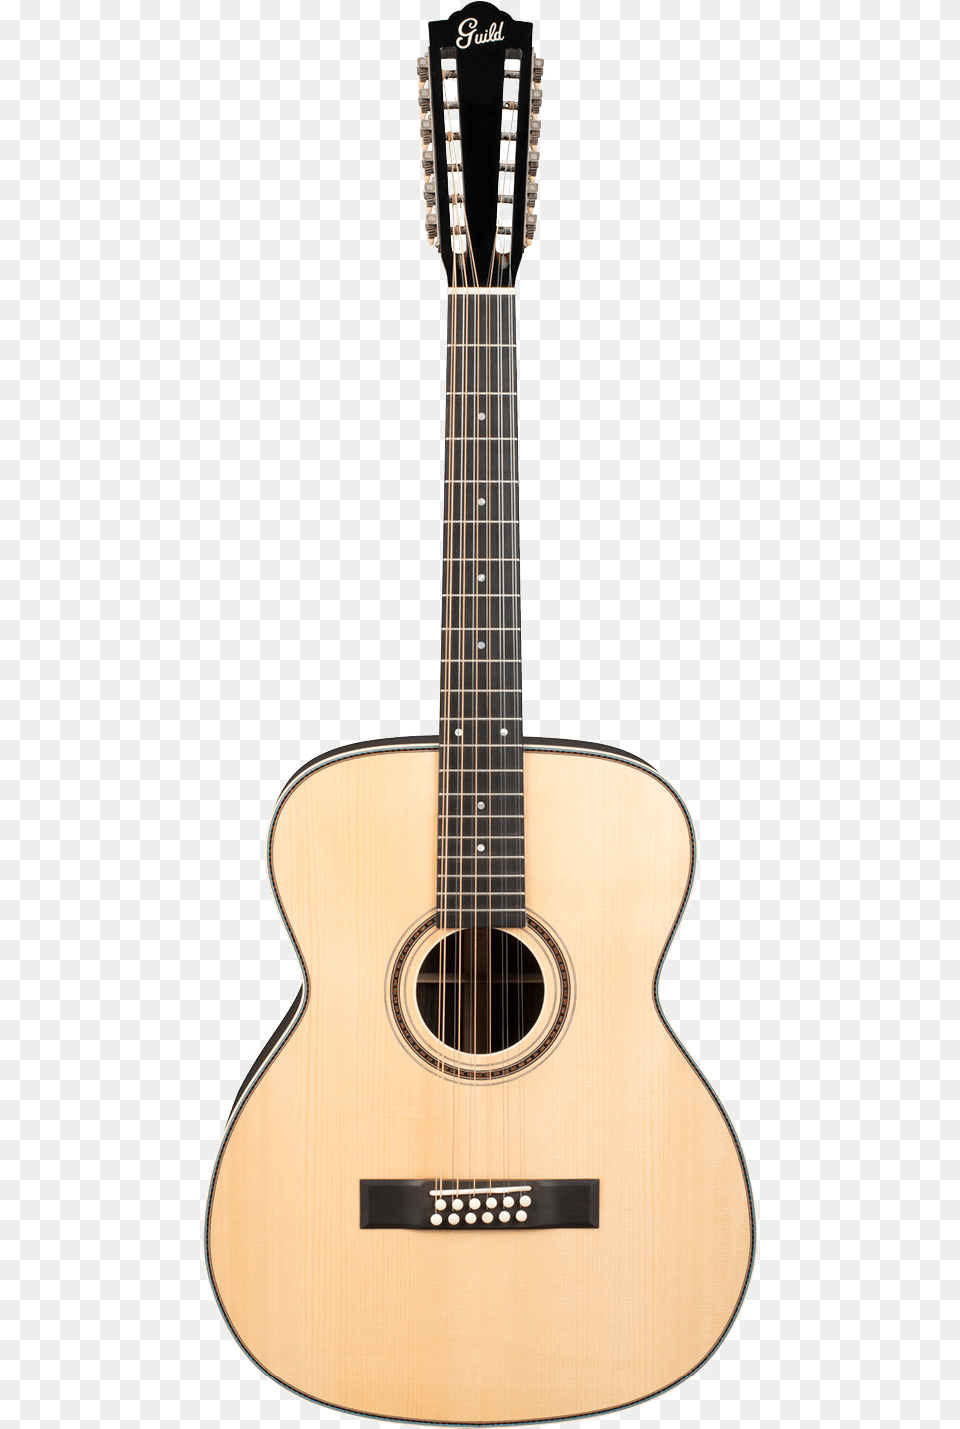 String Acoustic Guitar Collins Guitar, Musical Instrument Free Png Download